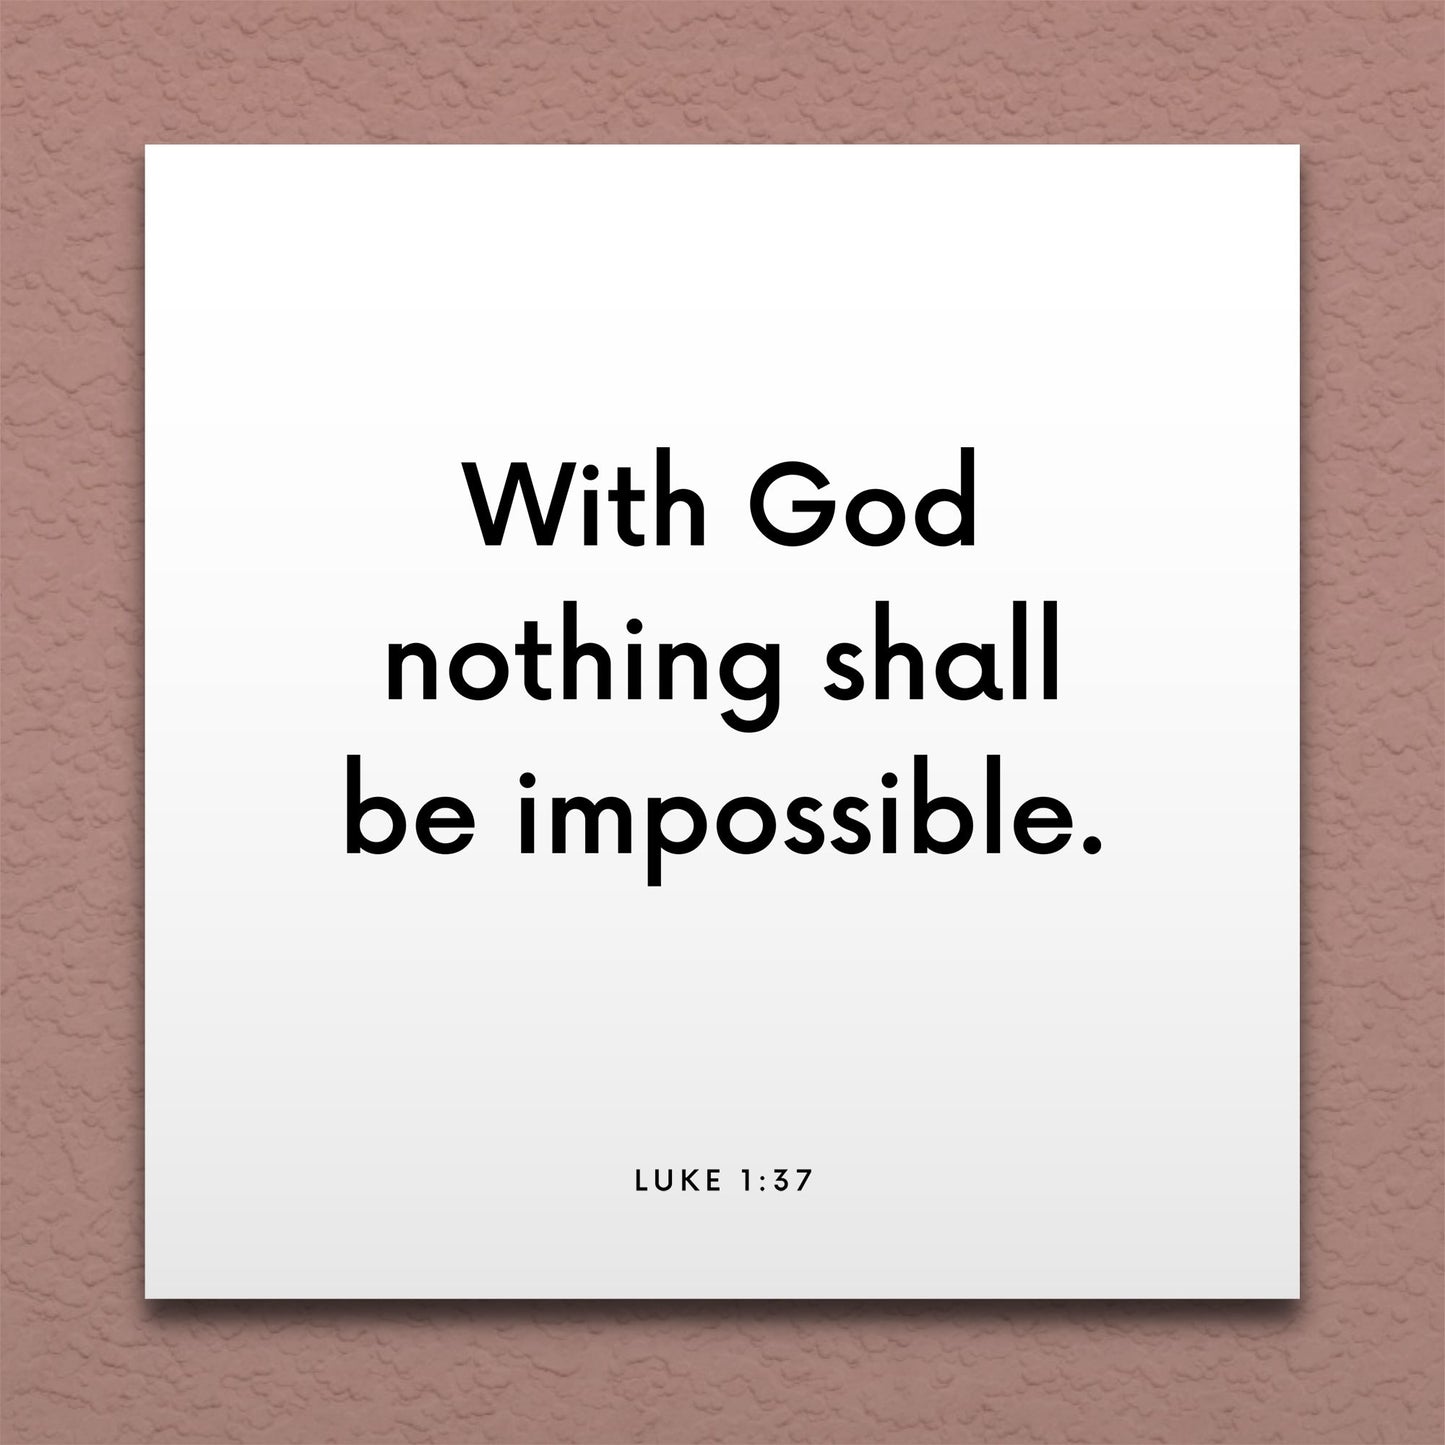 Wall-mounted scripture tile for Luke 1:37 - "With God nothing shall be impossible"